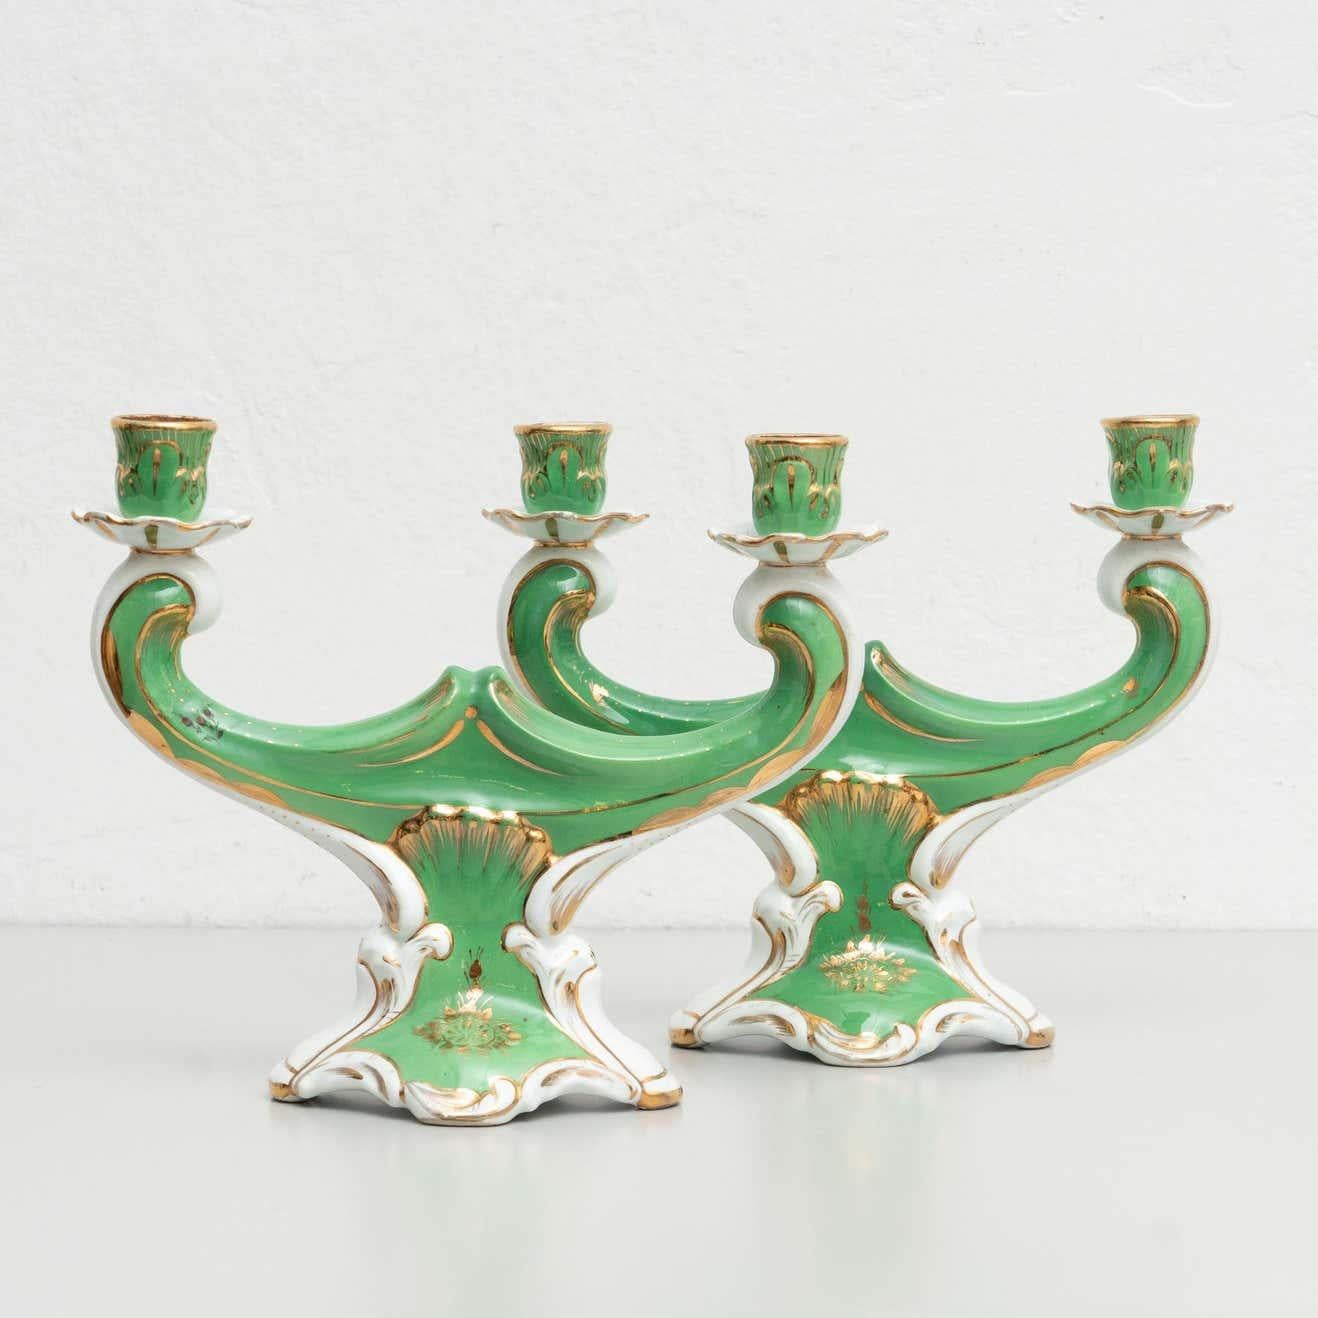 Spanish Set of 2 Hand Painted Ceramic Candle Holders, circa 1930